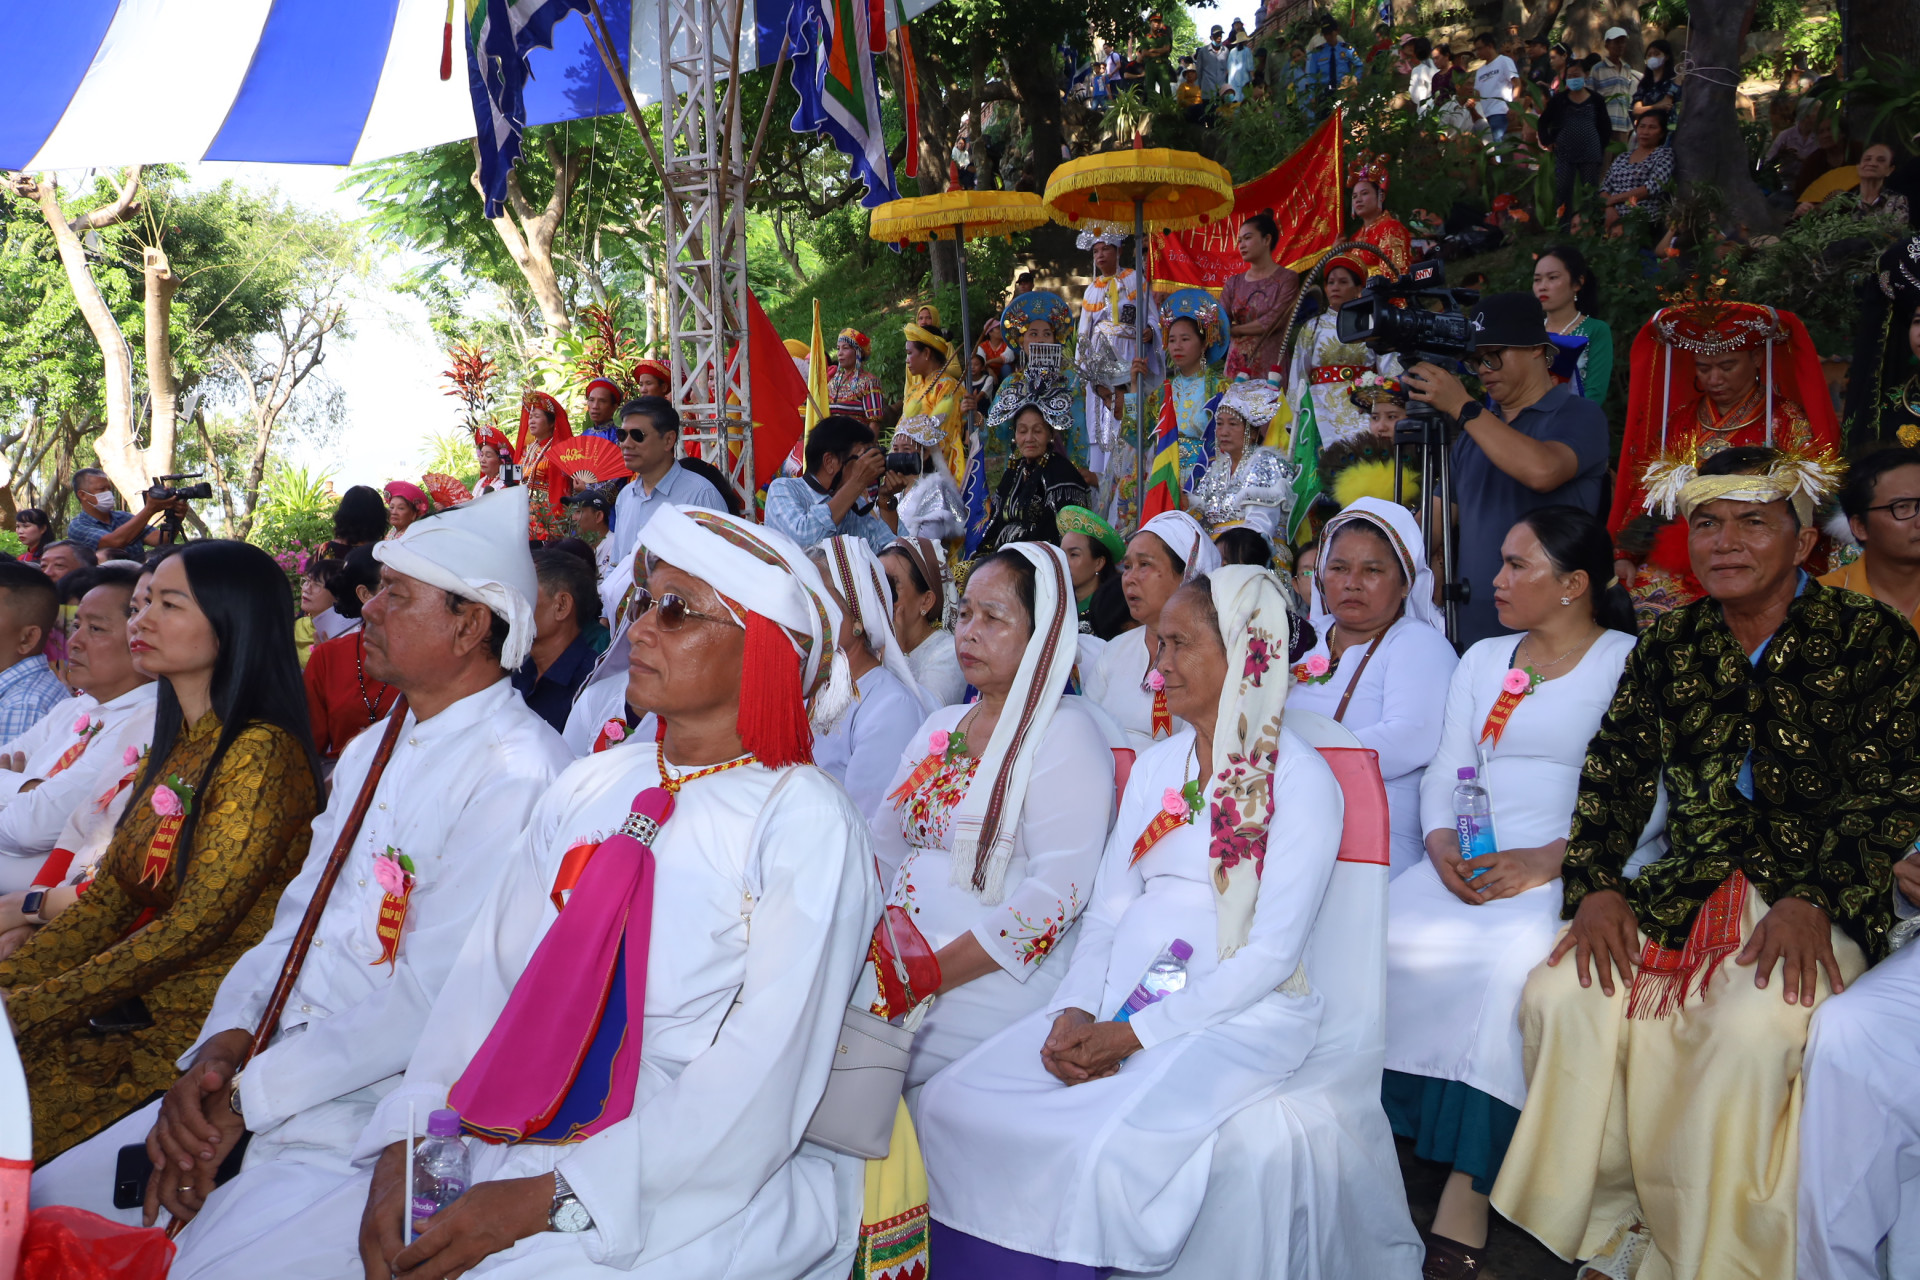 Cham people attending the opening ceremony

